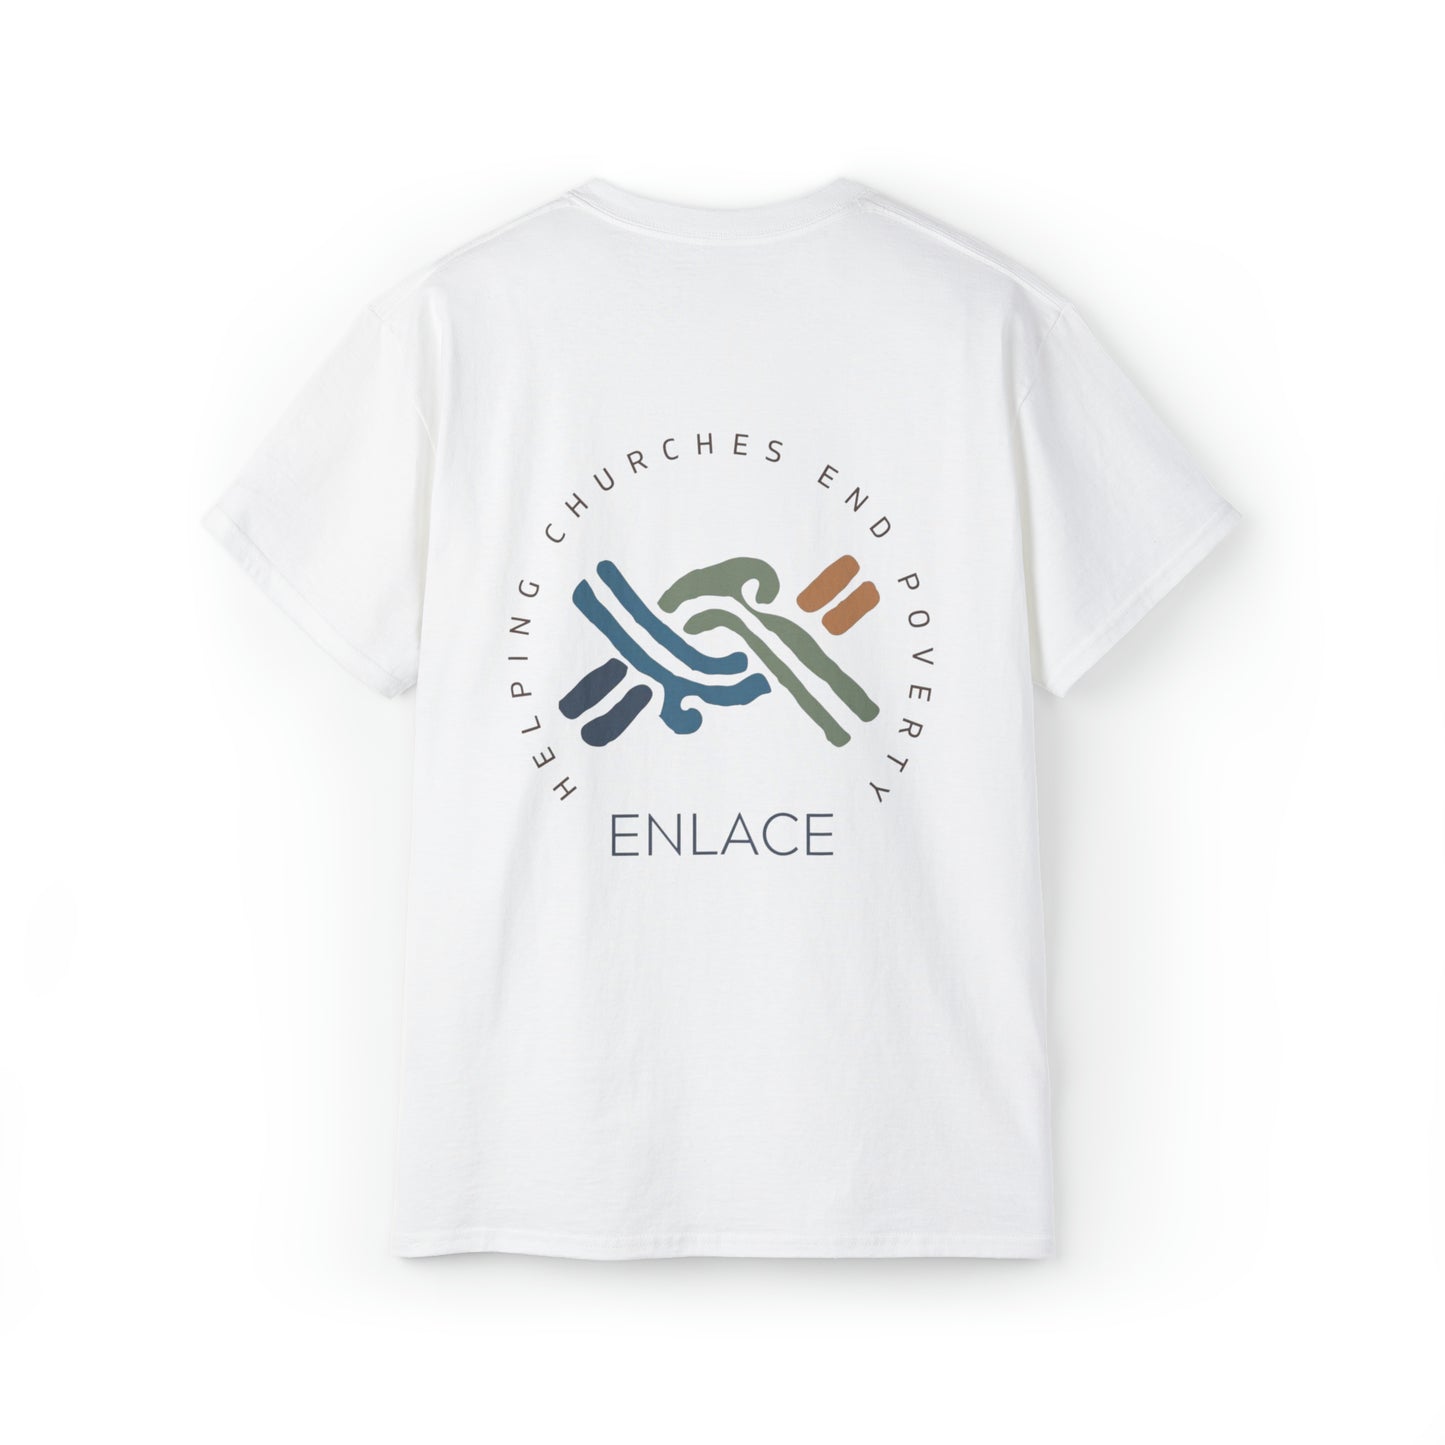 Helping Churches End Poverty T-Shirt